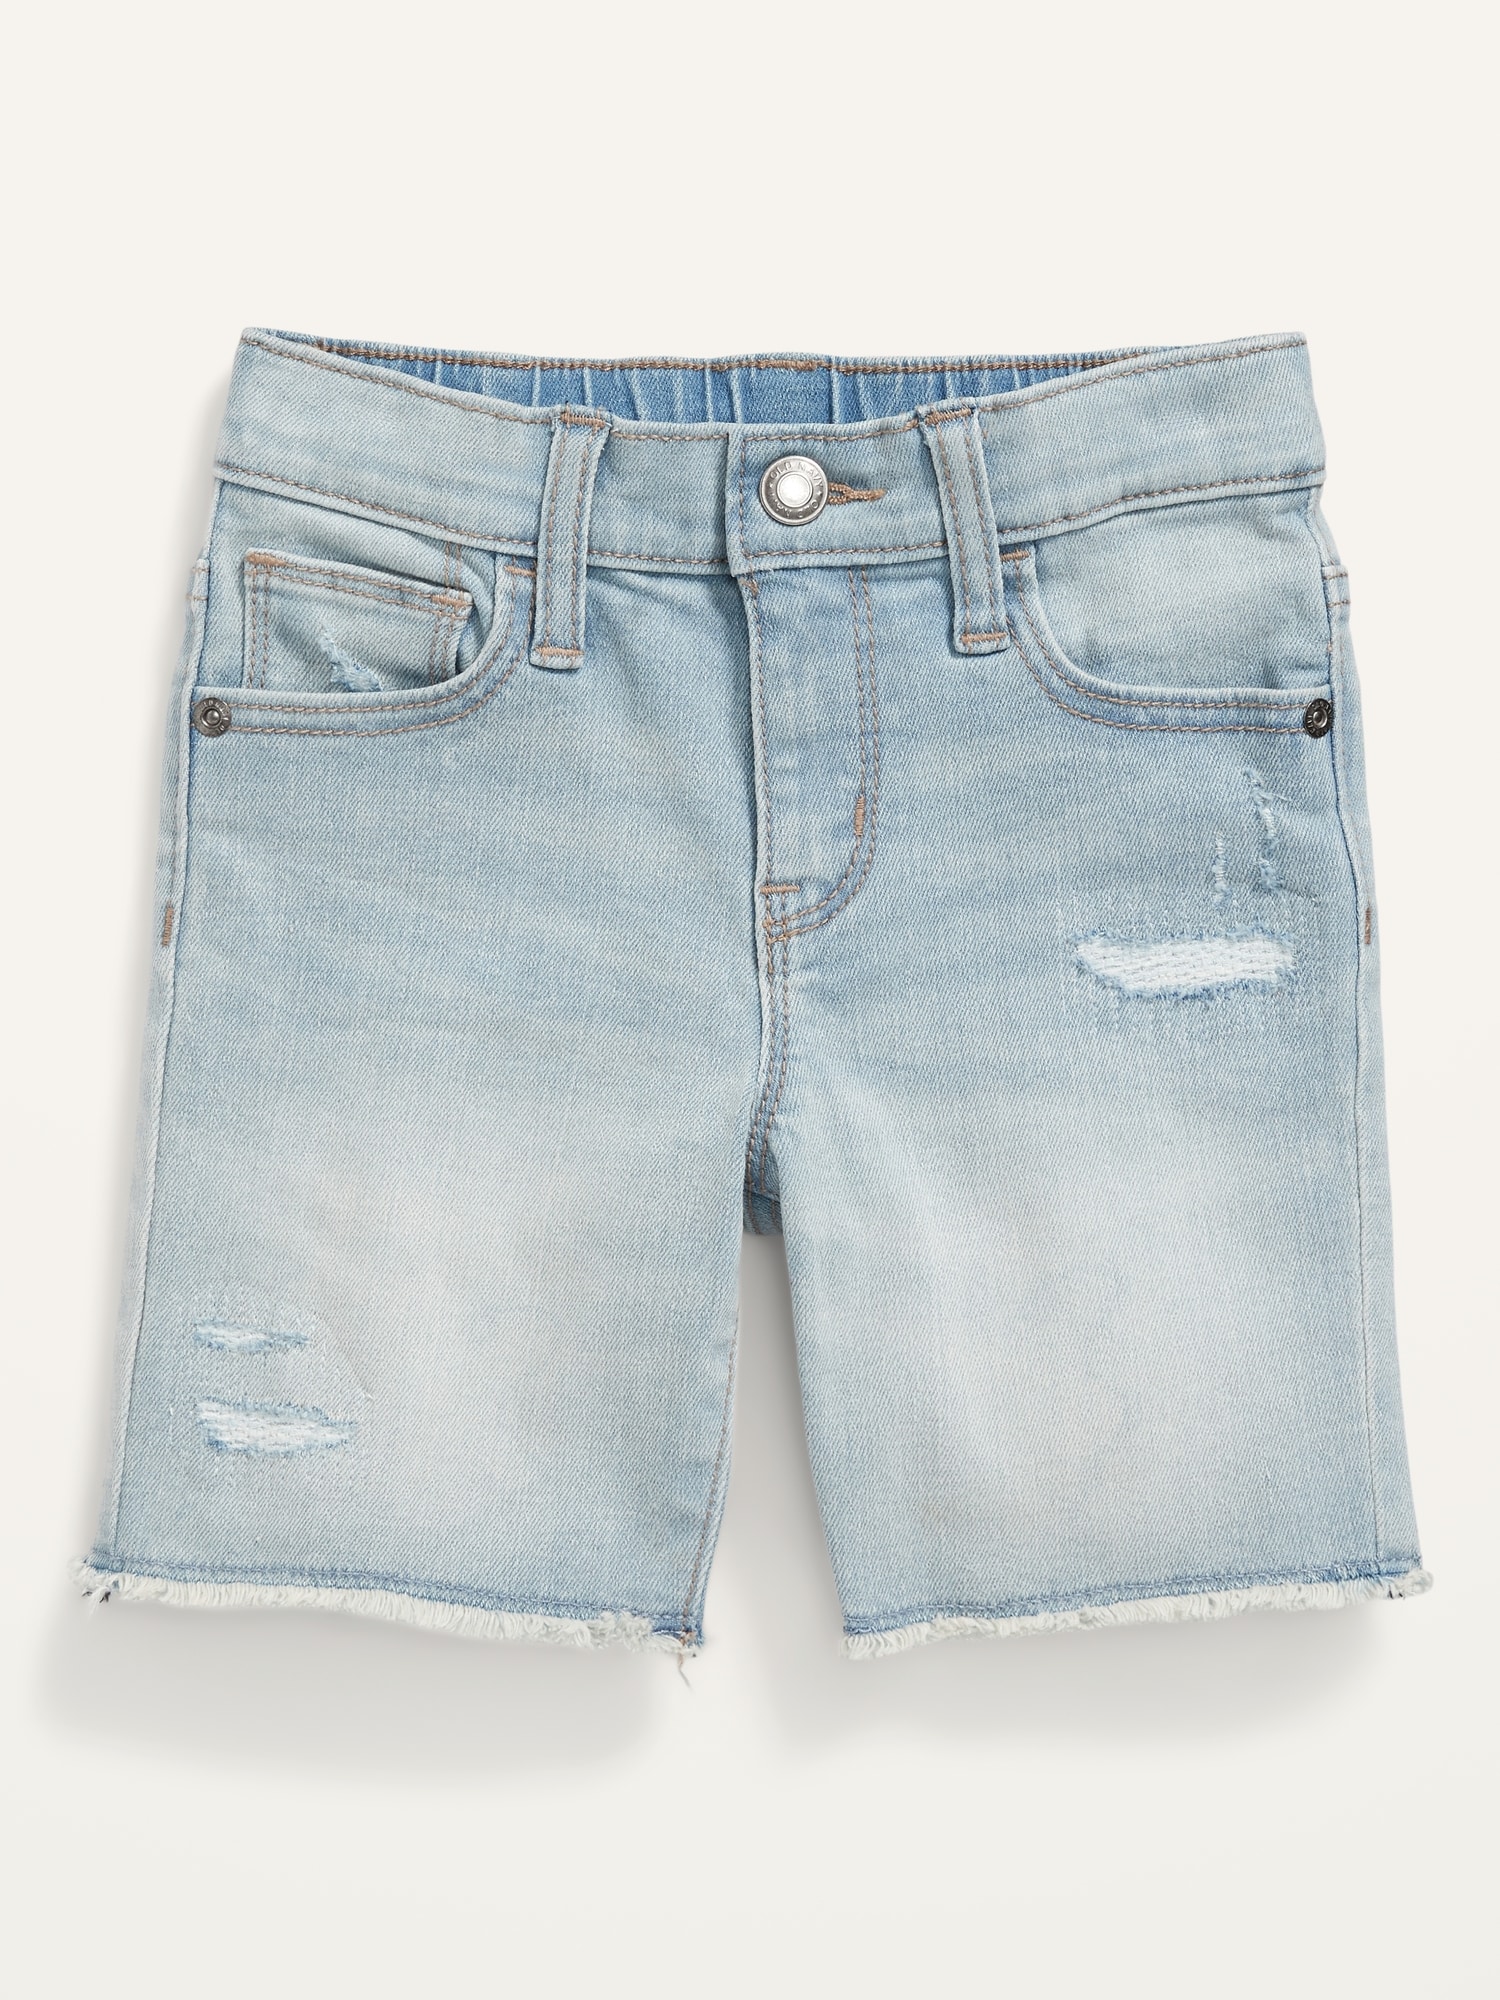 Unisex Distressed 360° Stretch Cut-Off Jean Shorts for Toddler | Old Navy